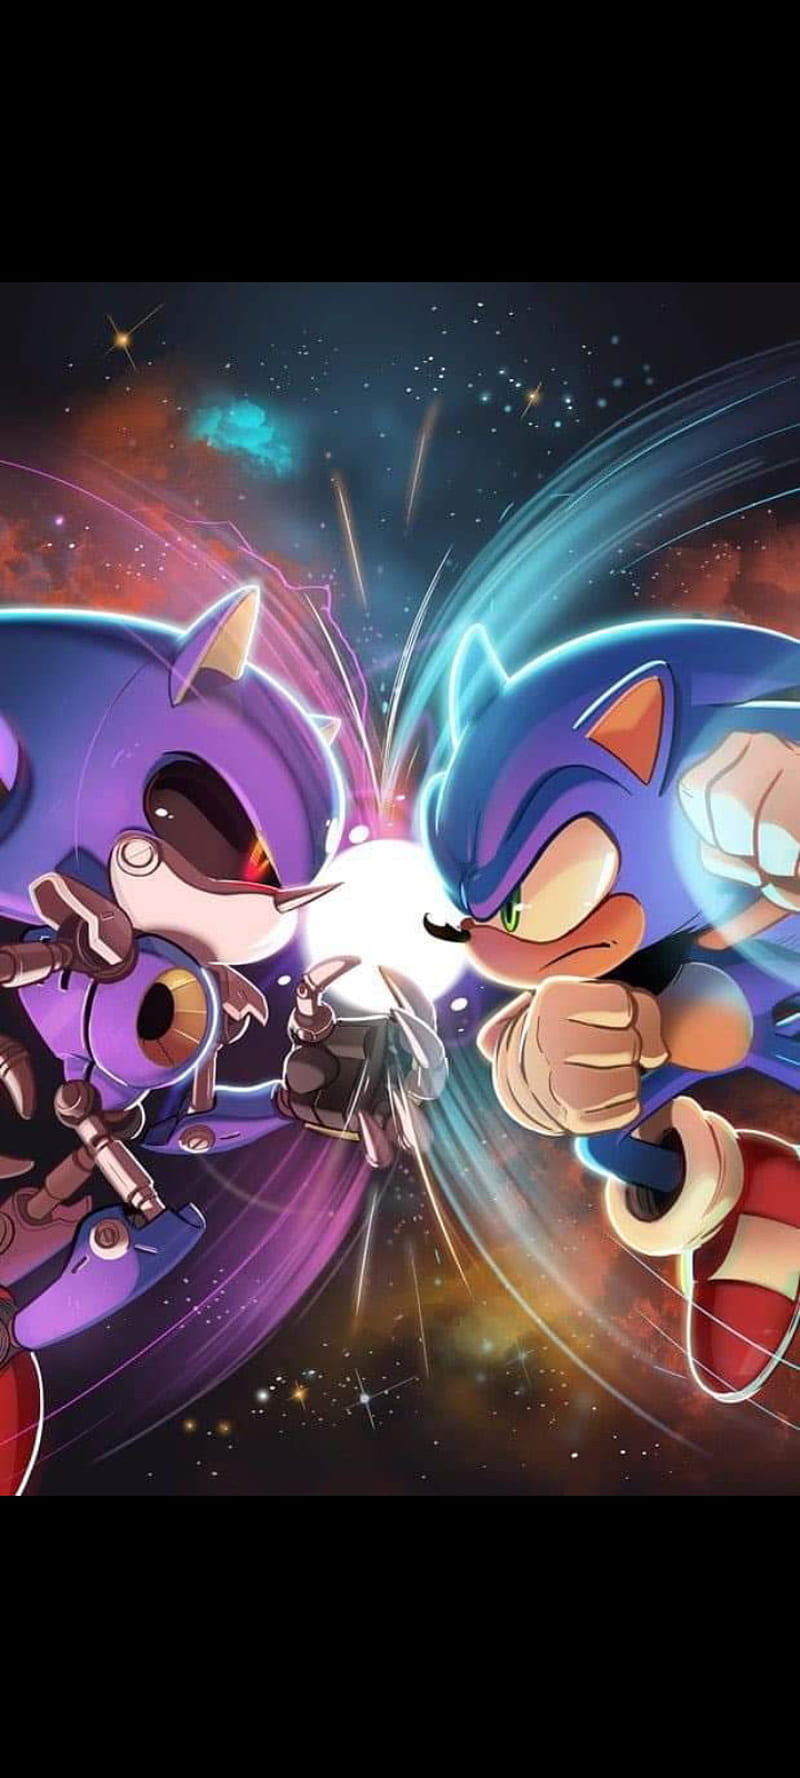 Sonic Frontiers Artwork Wallpaper - Cat with Monocle